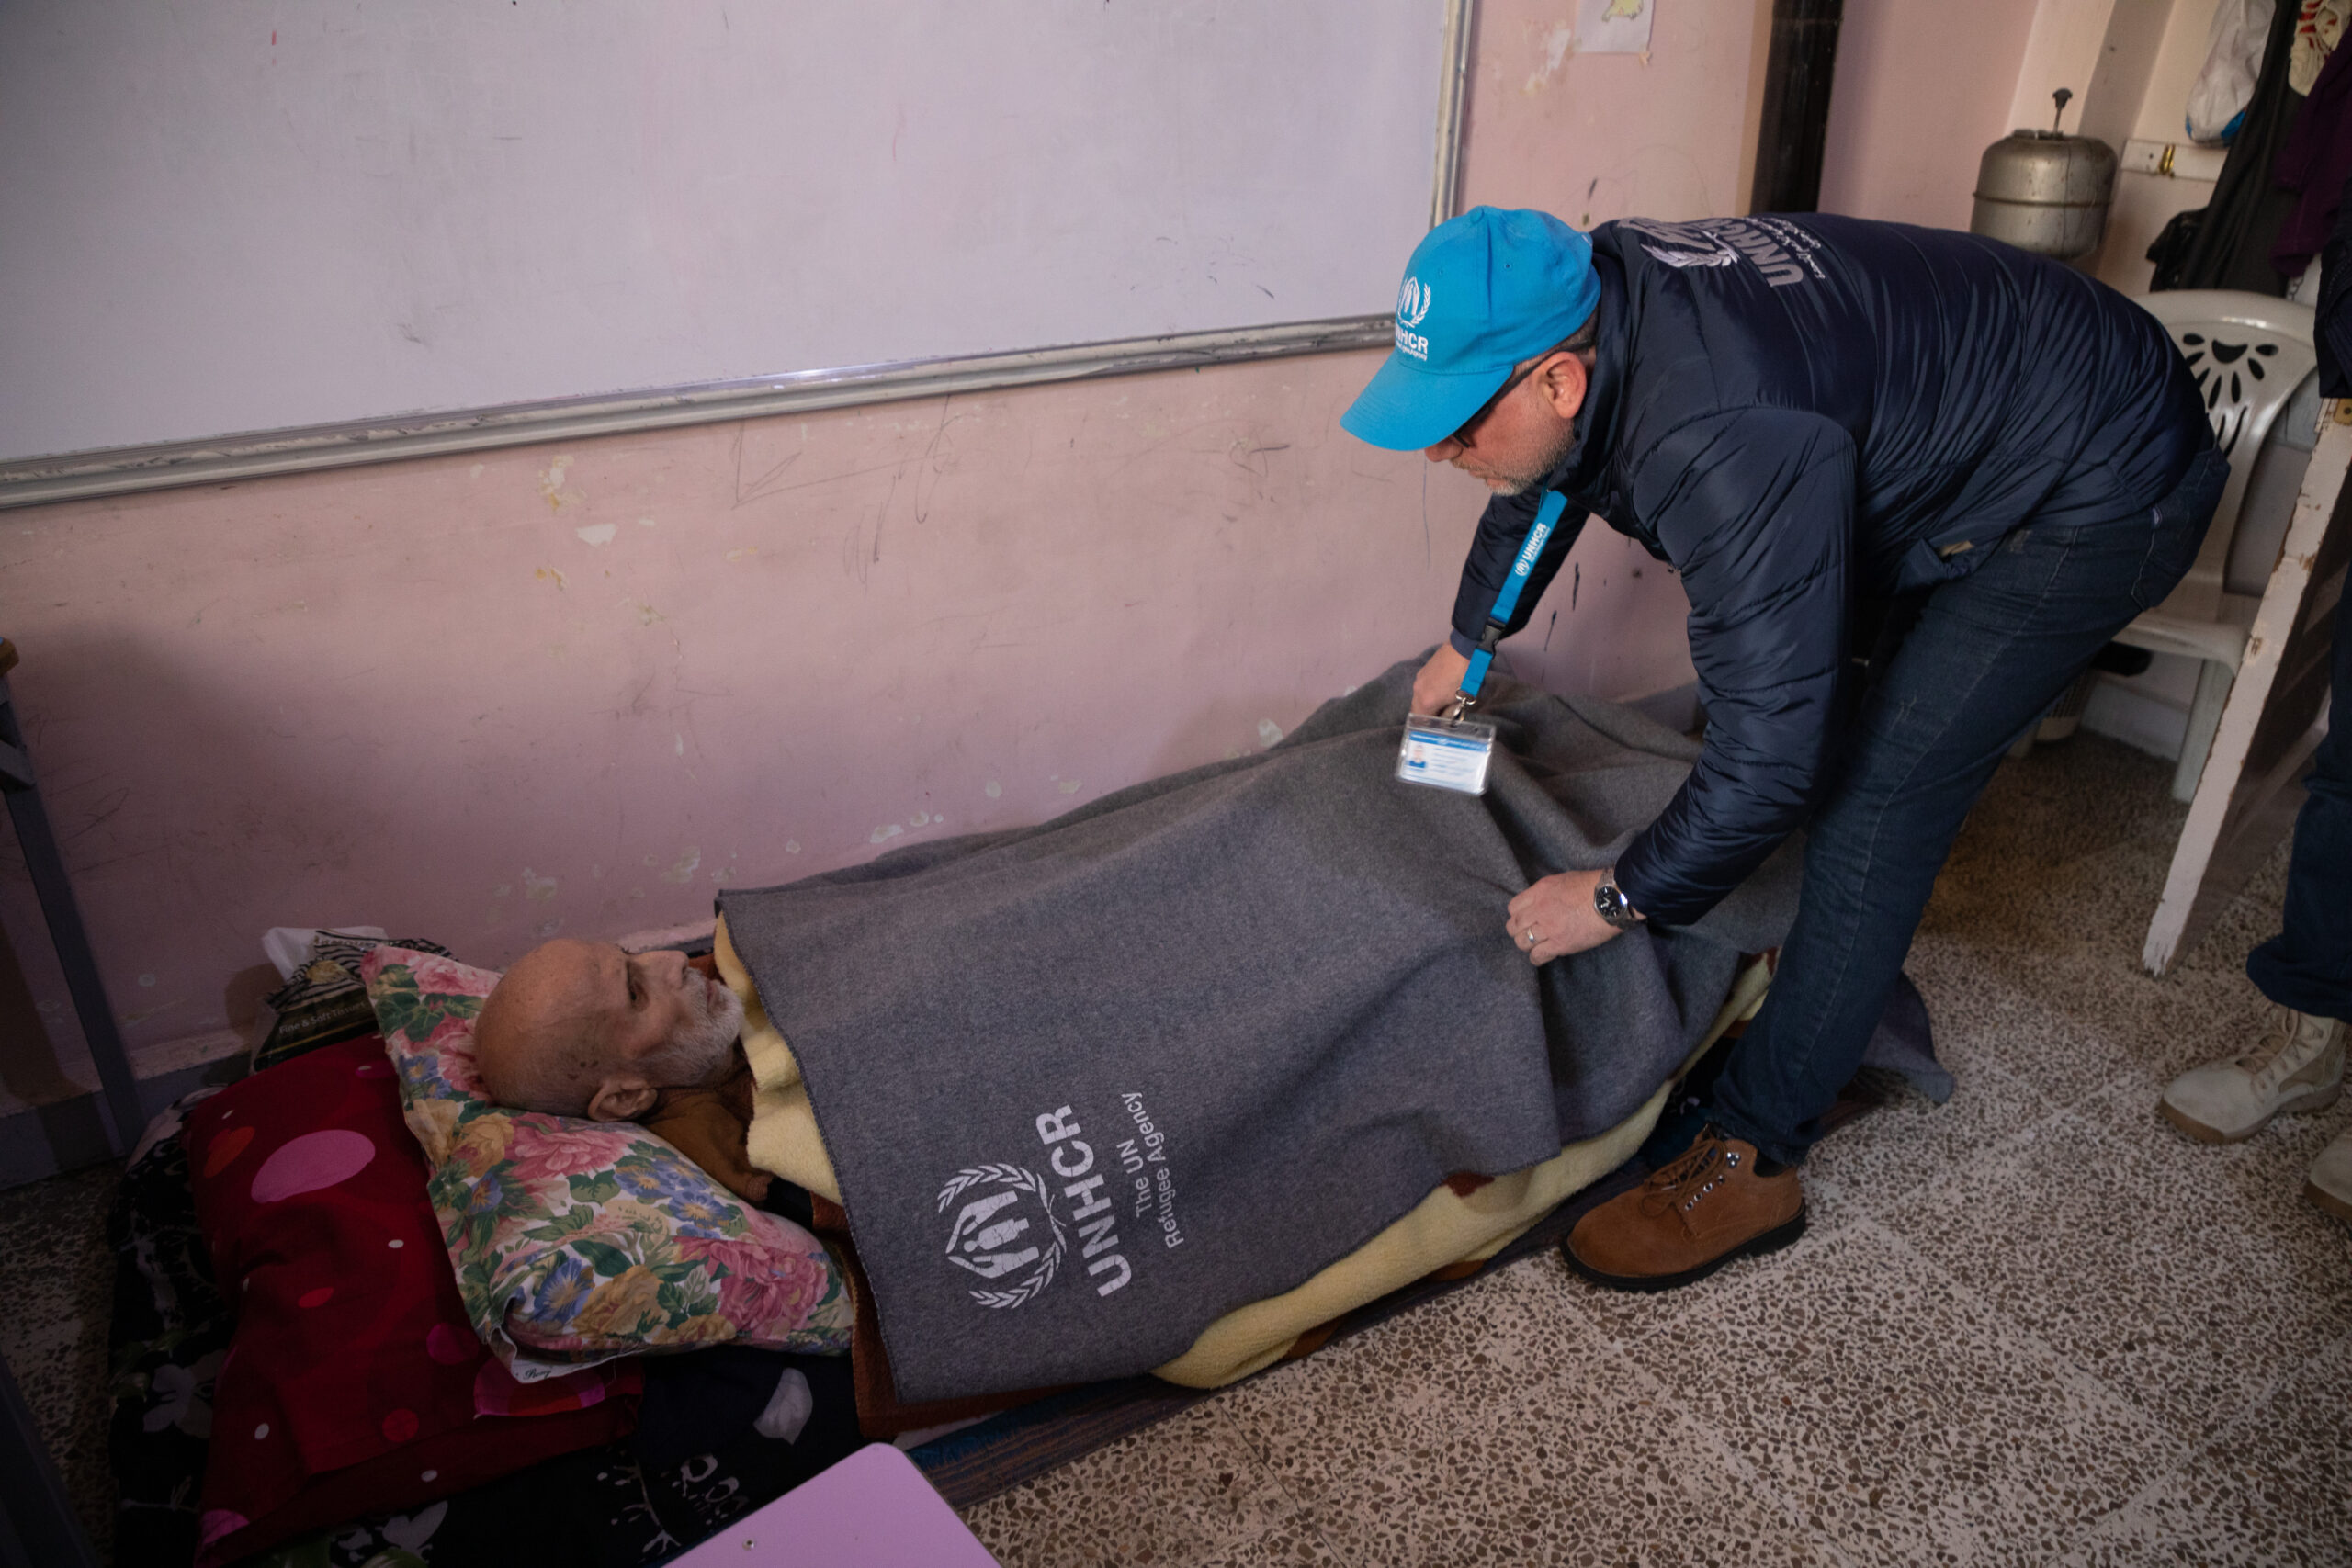 Syria. UNHCR provides assistance to earthquake-affected families in Aleppo